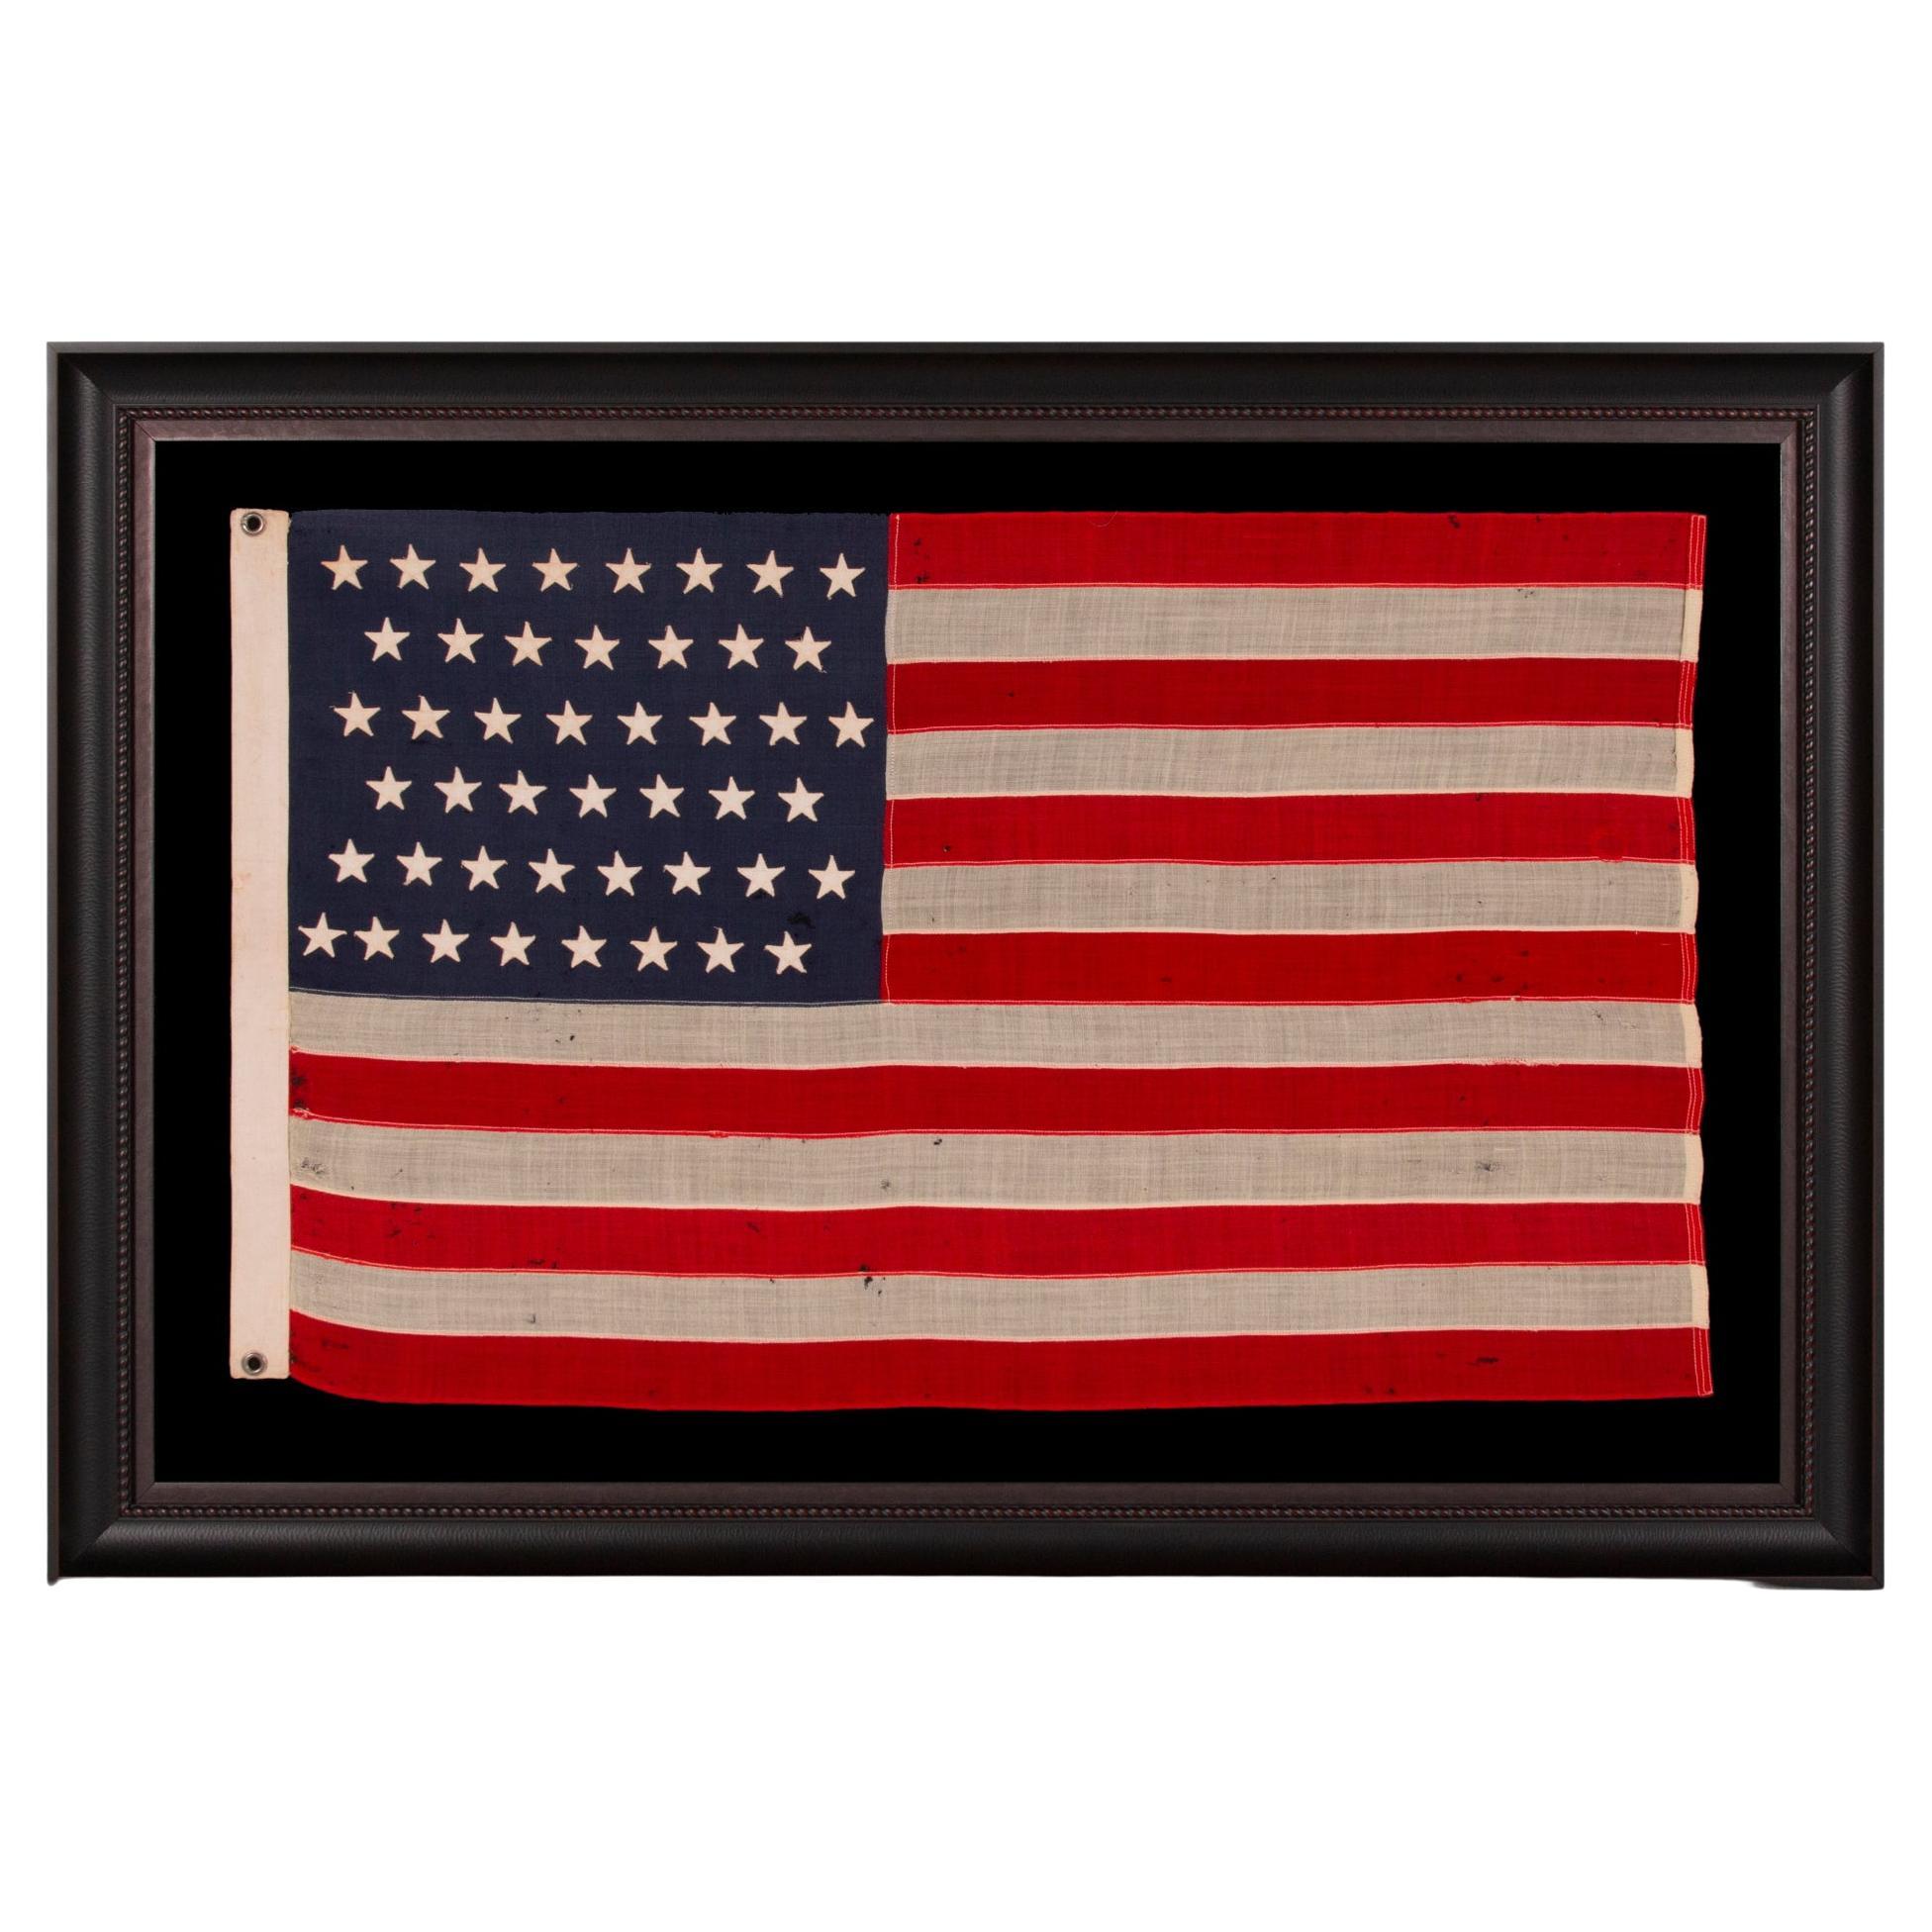 46 Star Antiques American Flag, Small Scale, Oklahoma Statehood, Ca 1907-1912